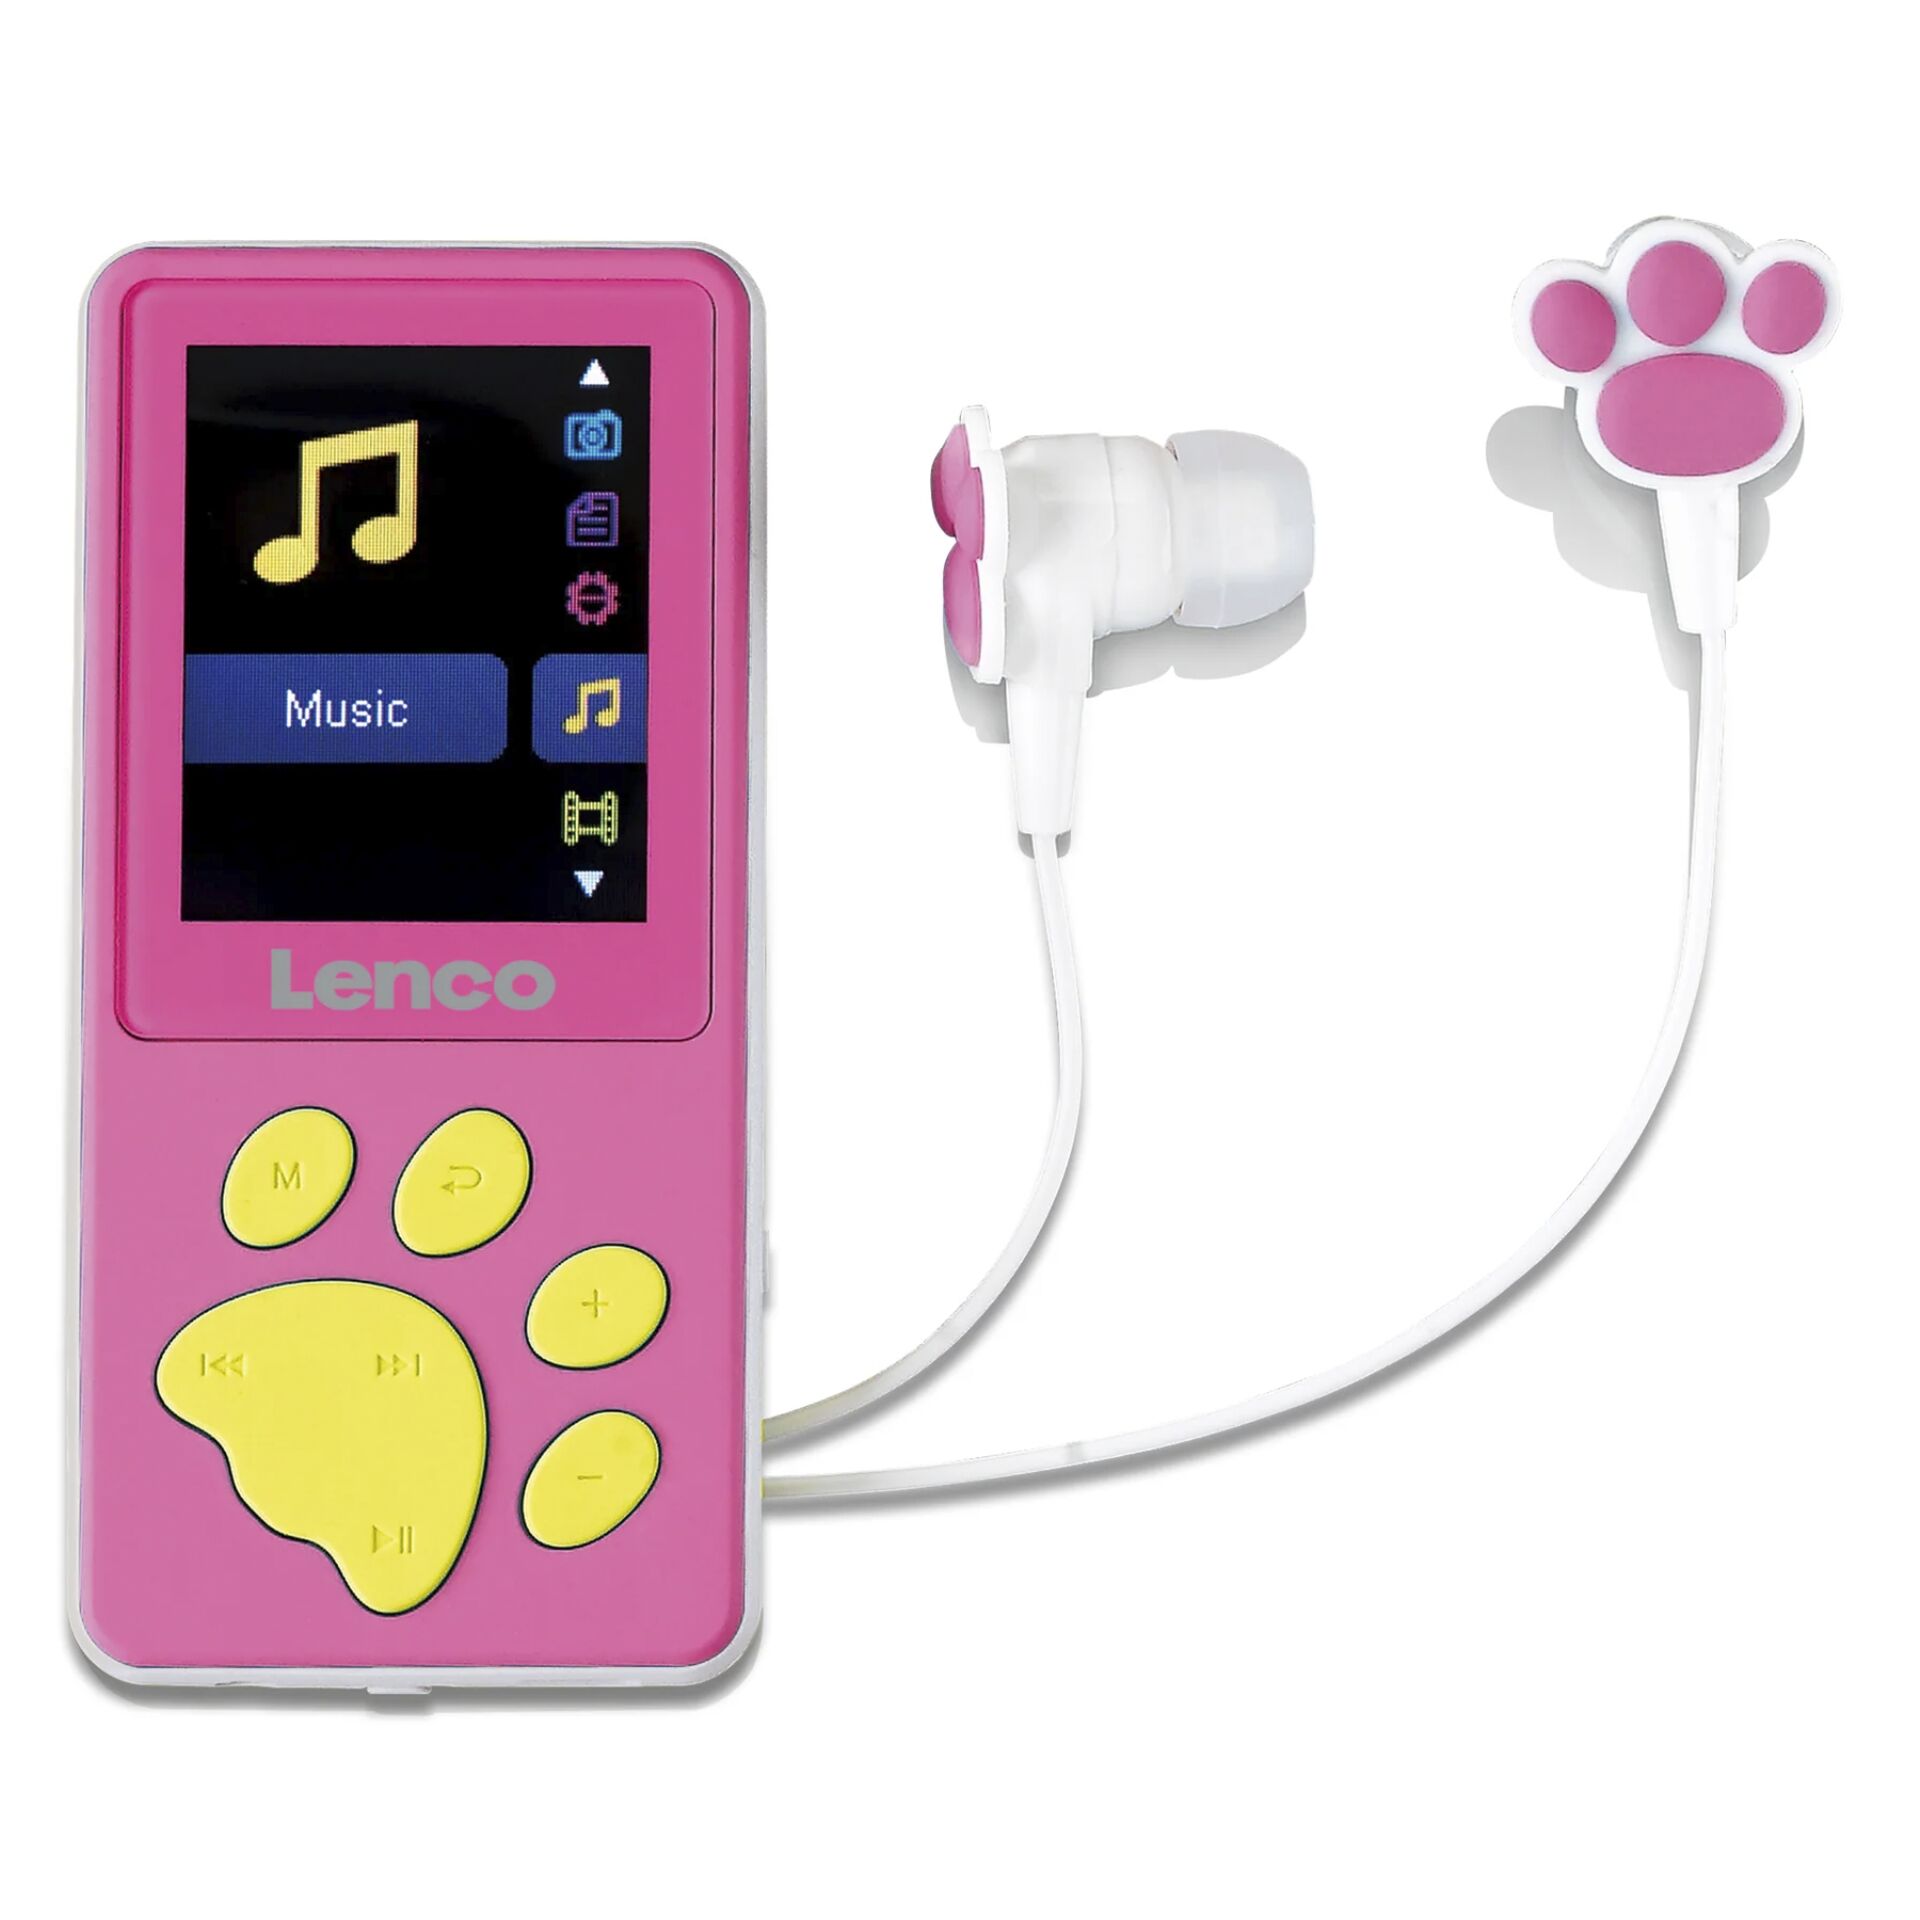 New--8GB MP3 MP4 player with 1.8' screen